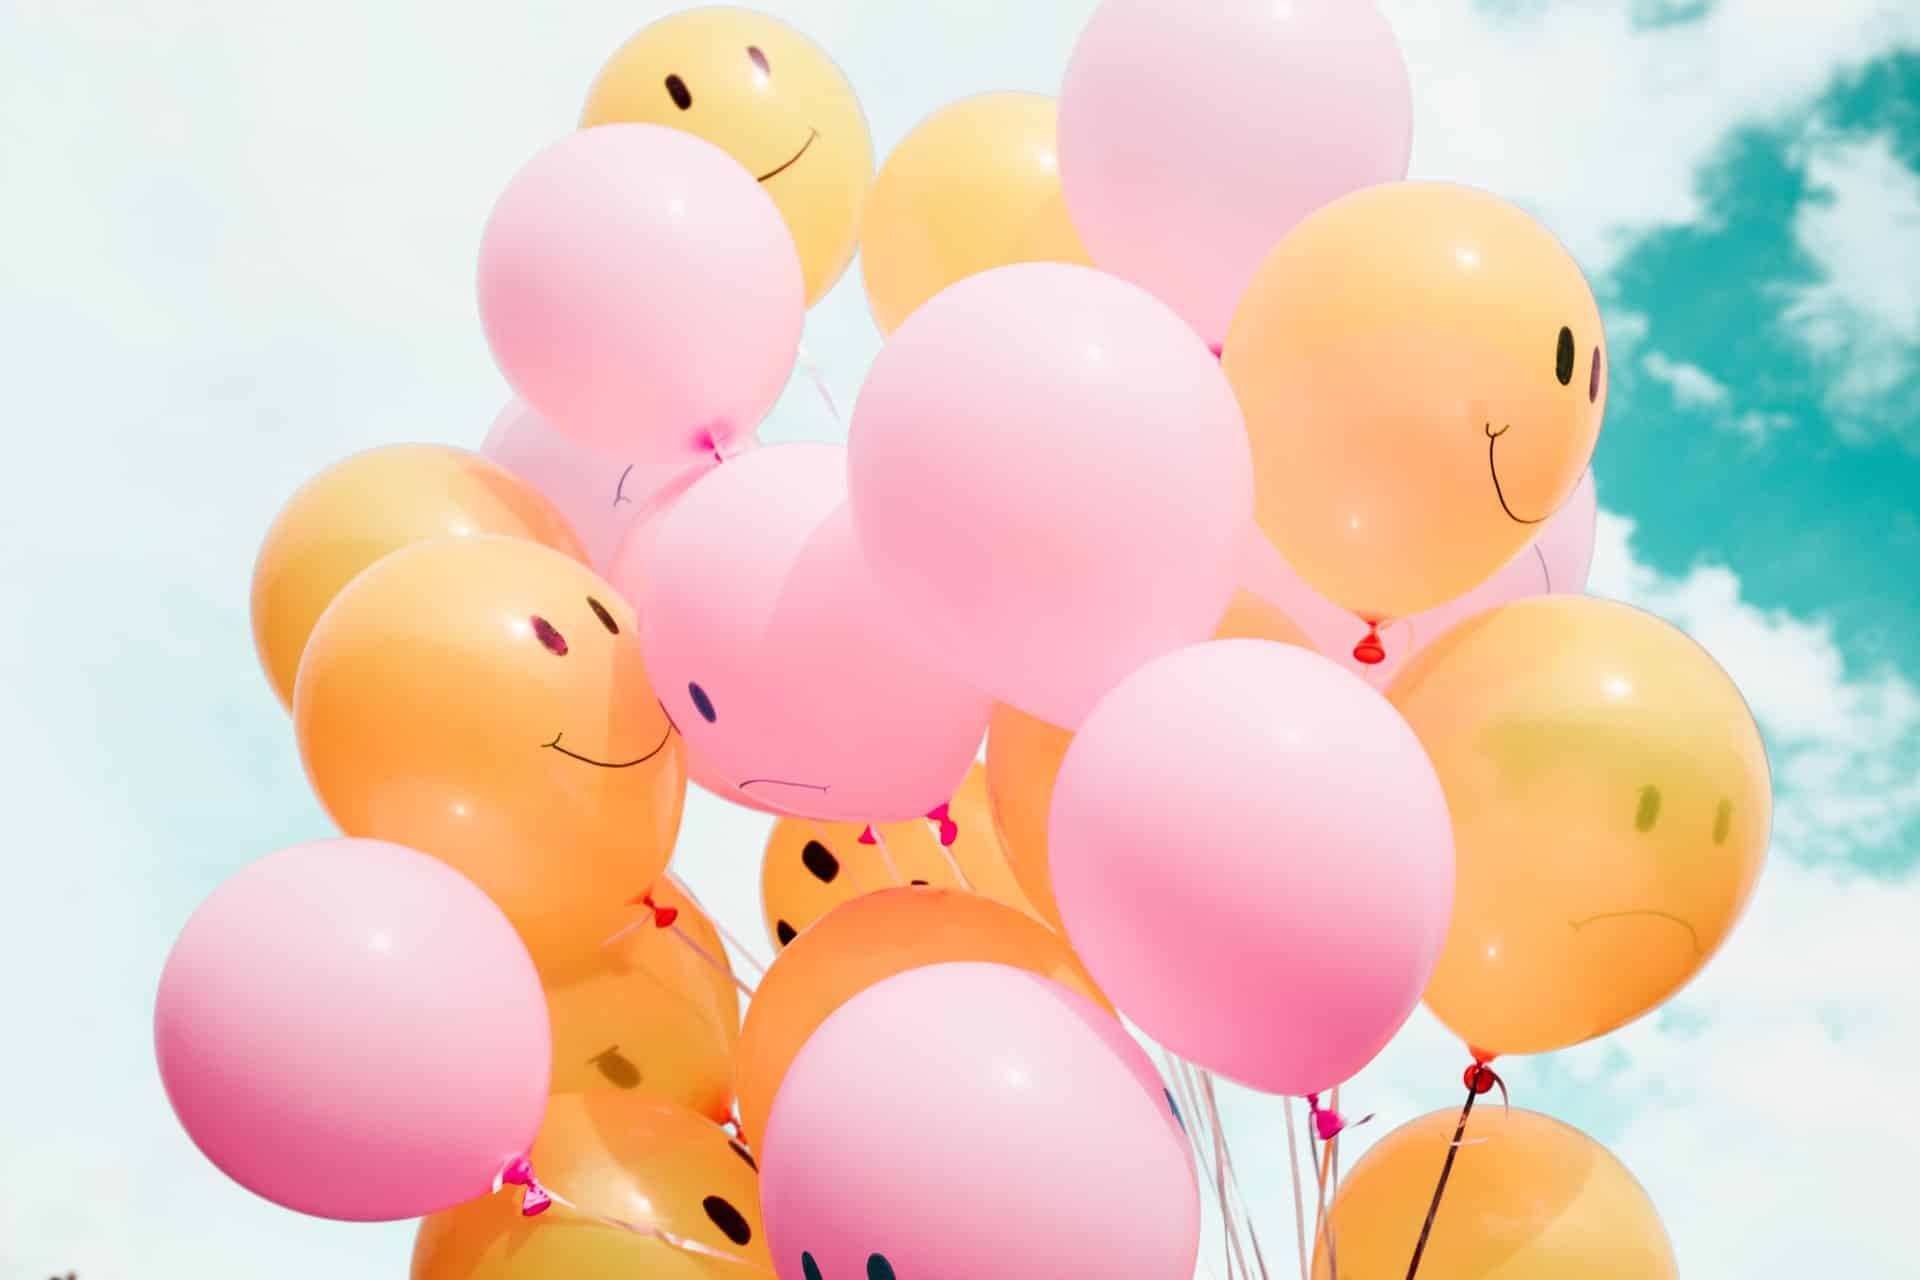 Orange and Pink Balloons With Happy Faces | Counseling Services